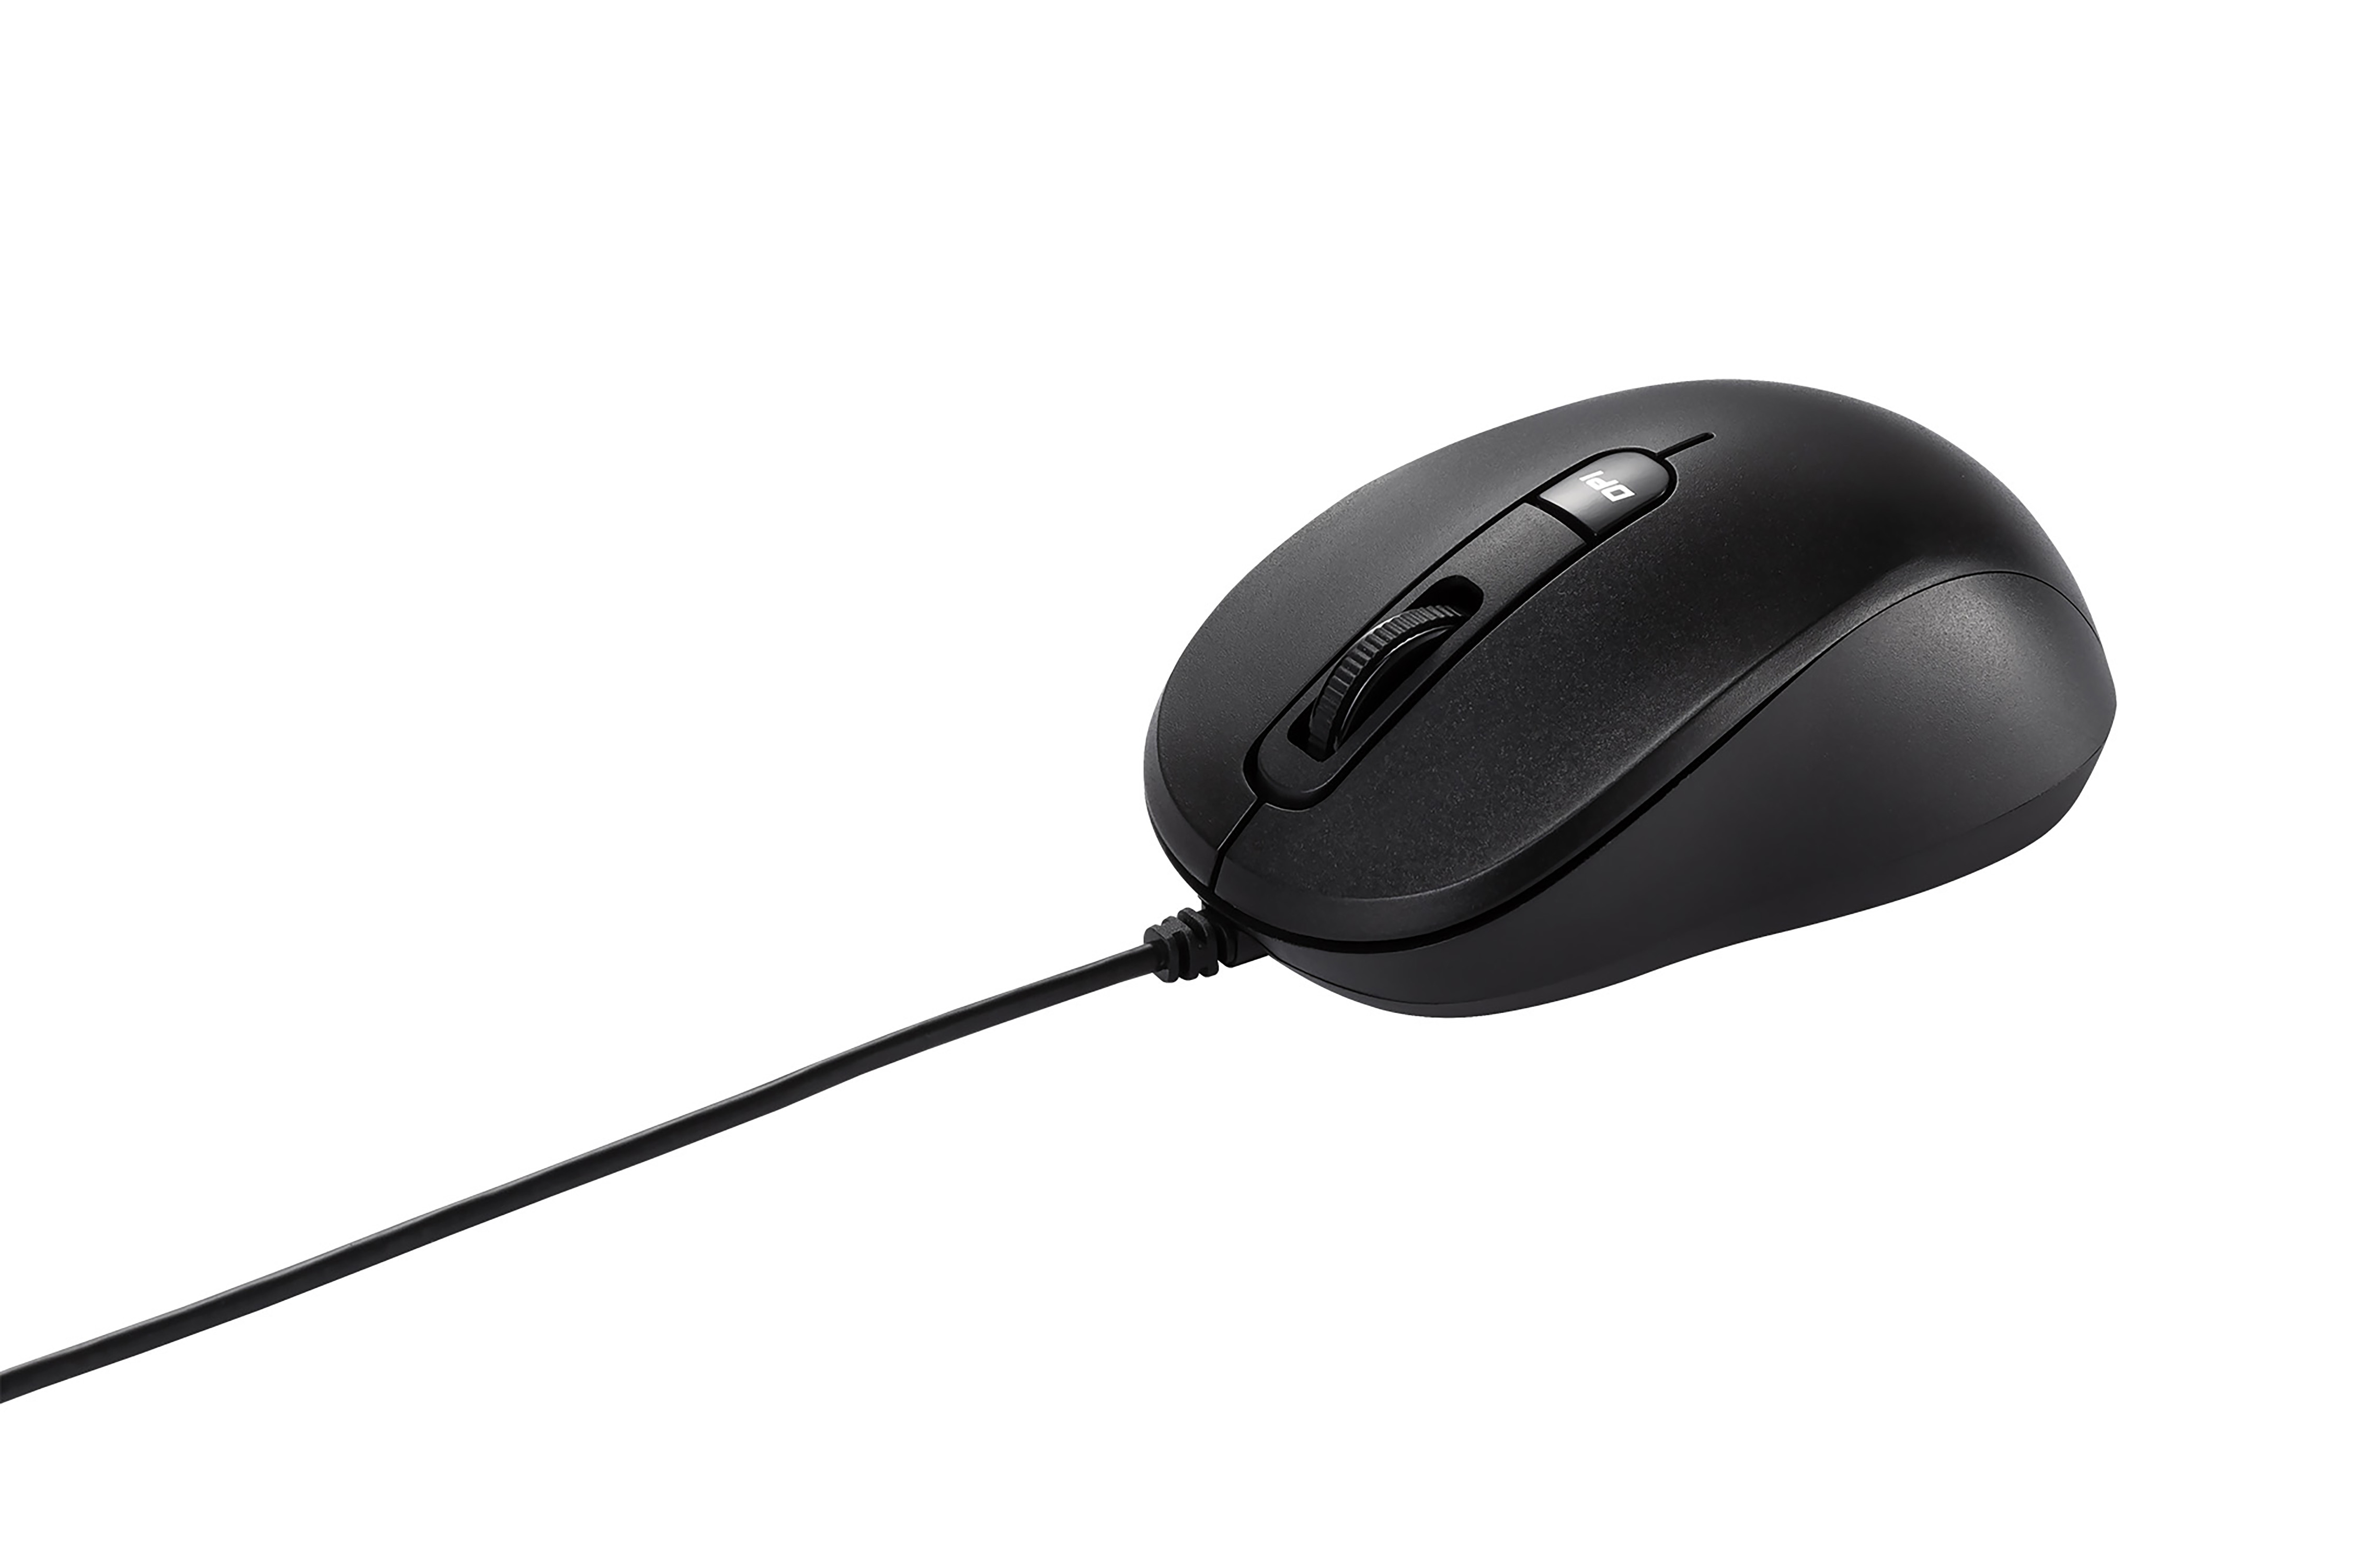 Asus Mu101c Wired Mouse 90xb05rn-bmu000 - WC01